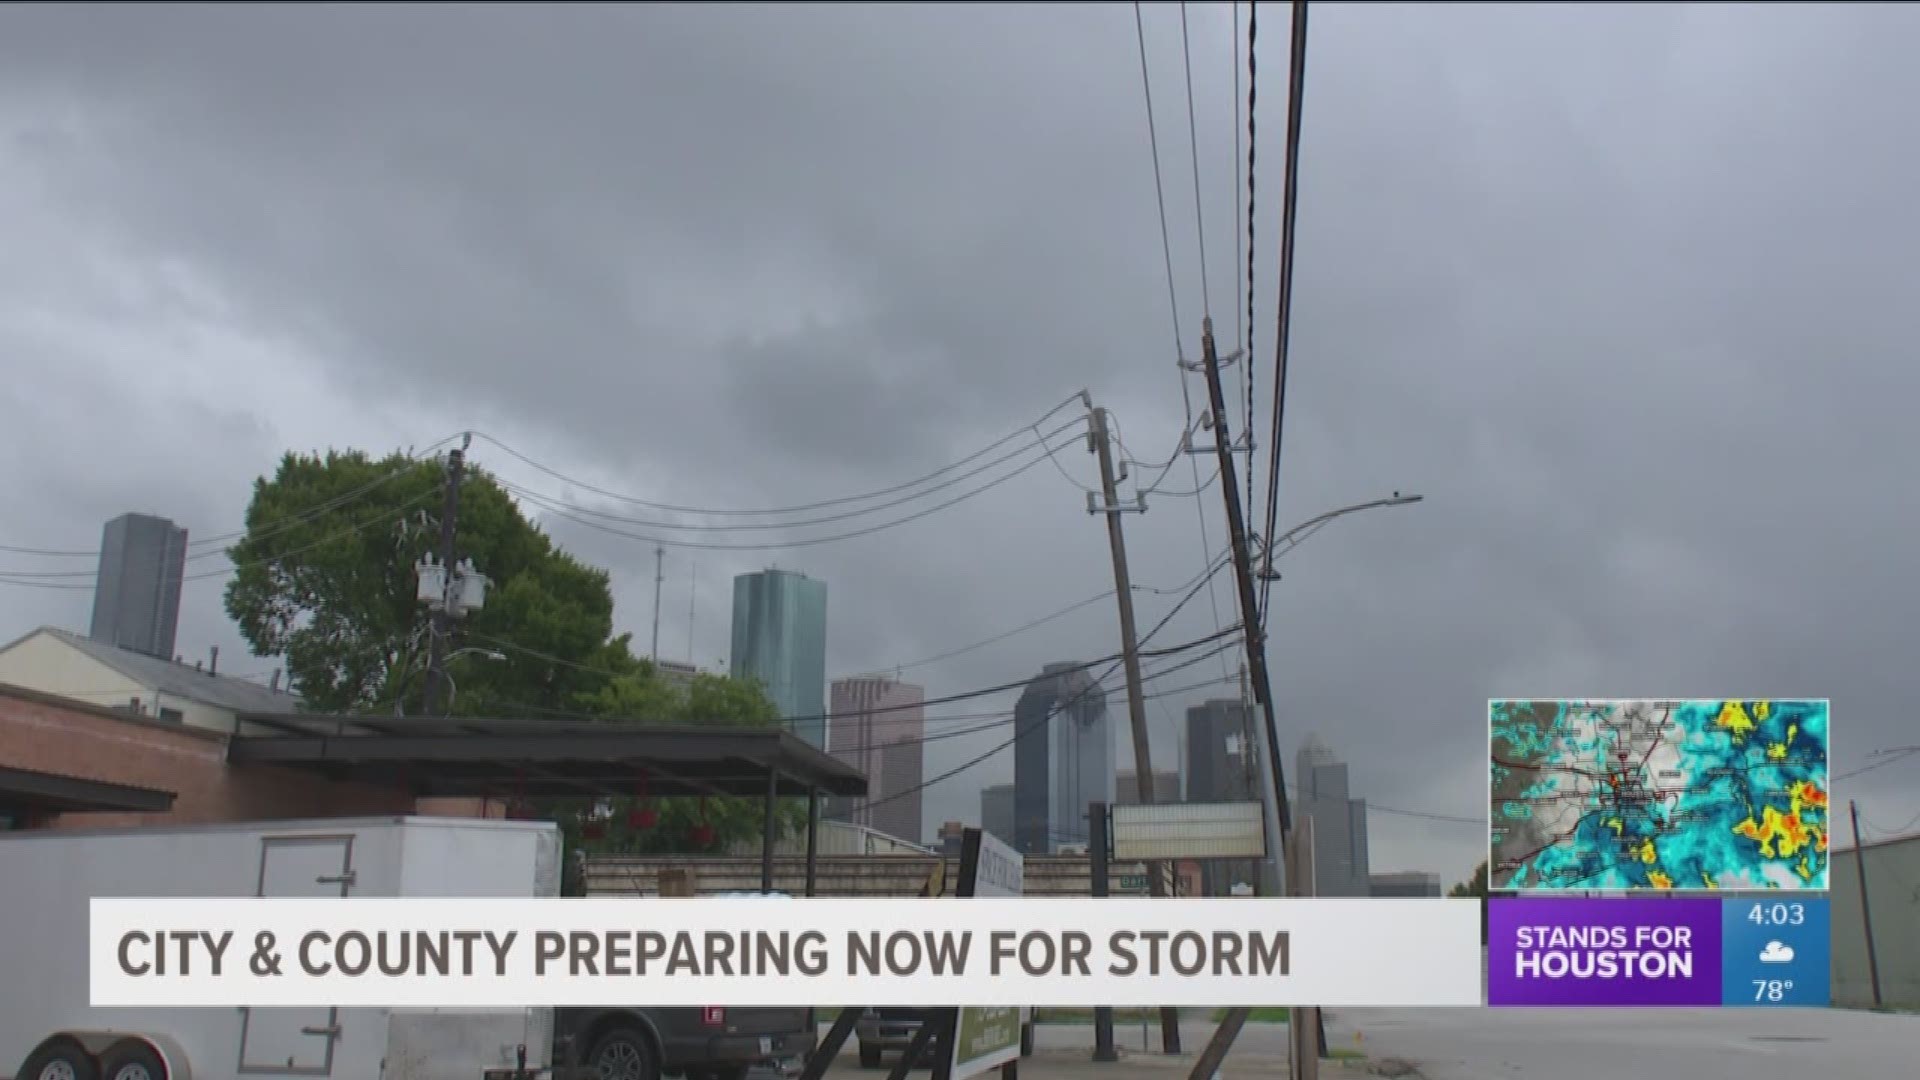 Houston-area flood control workers, first responders, and emergency officials spent Tuesday preparing for the possibility of heavy rain from a potential tropical system headed toward Texas.